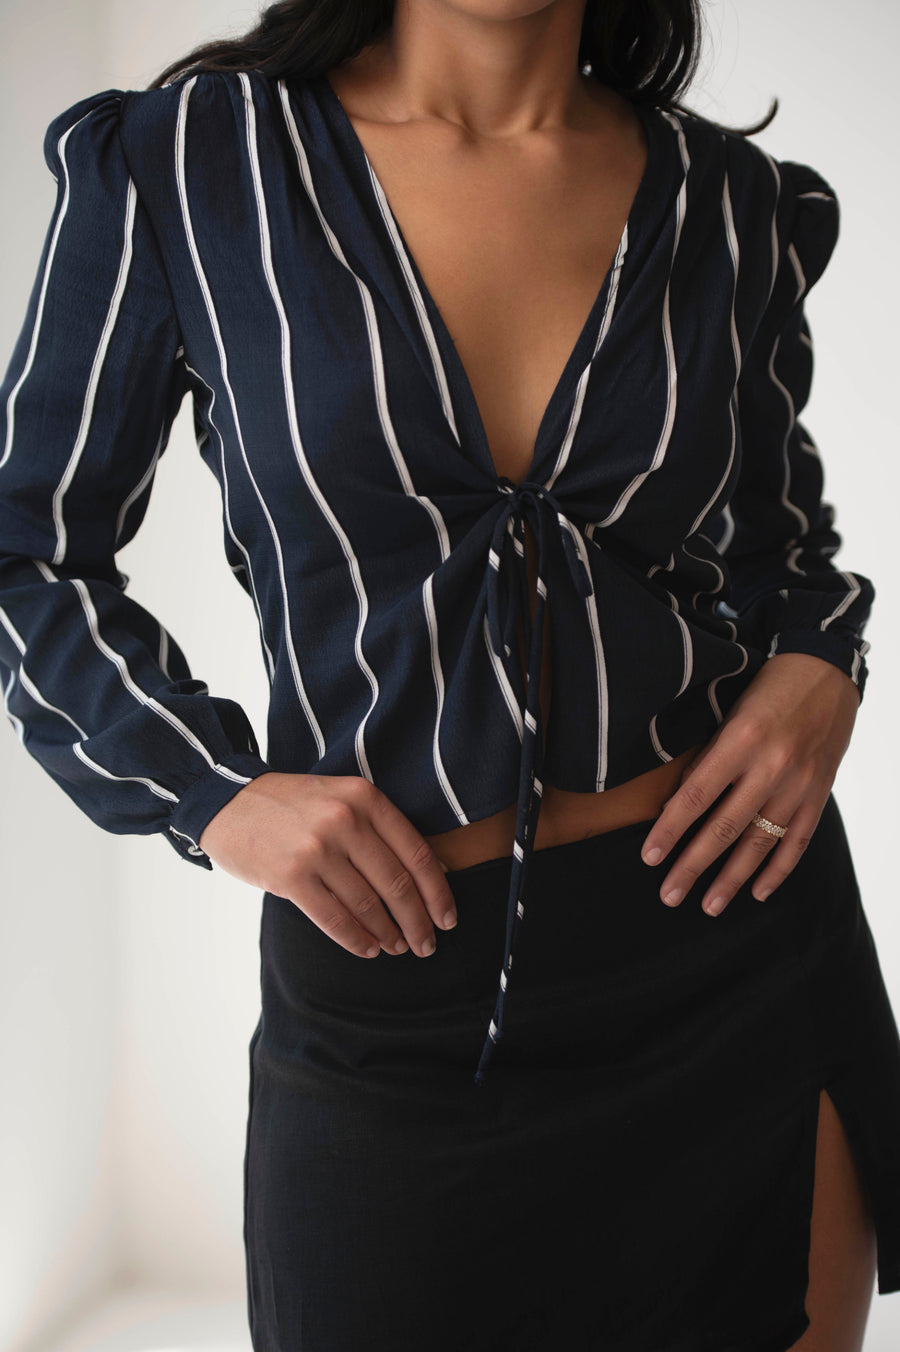 The Aida Top in Navy Stripes